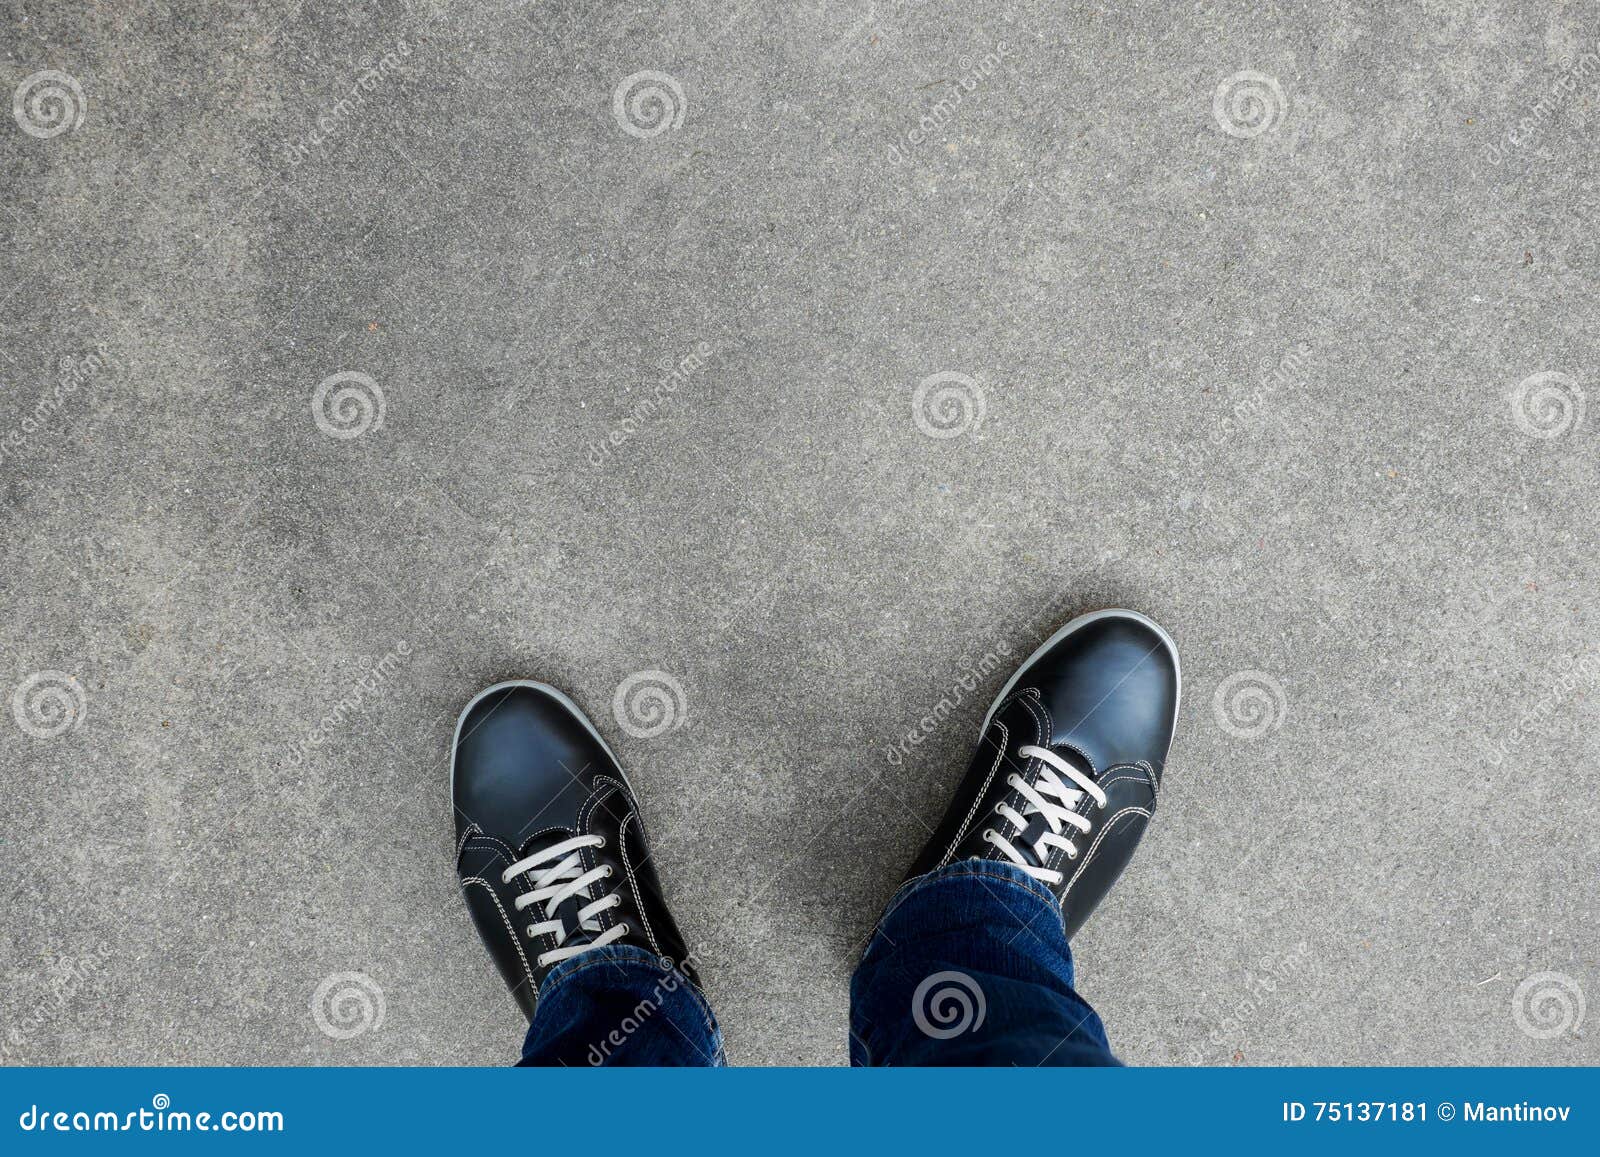 Black Casual Shoes Standing on Concrete Floor Stock Image - Image of ...